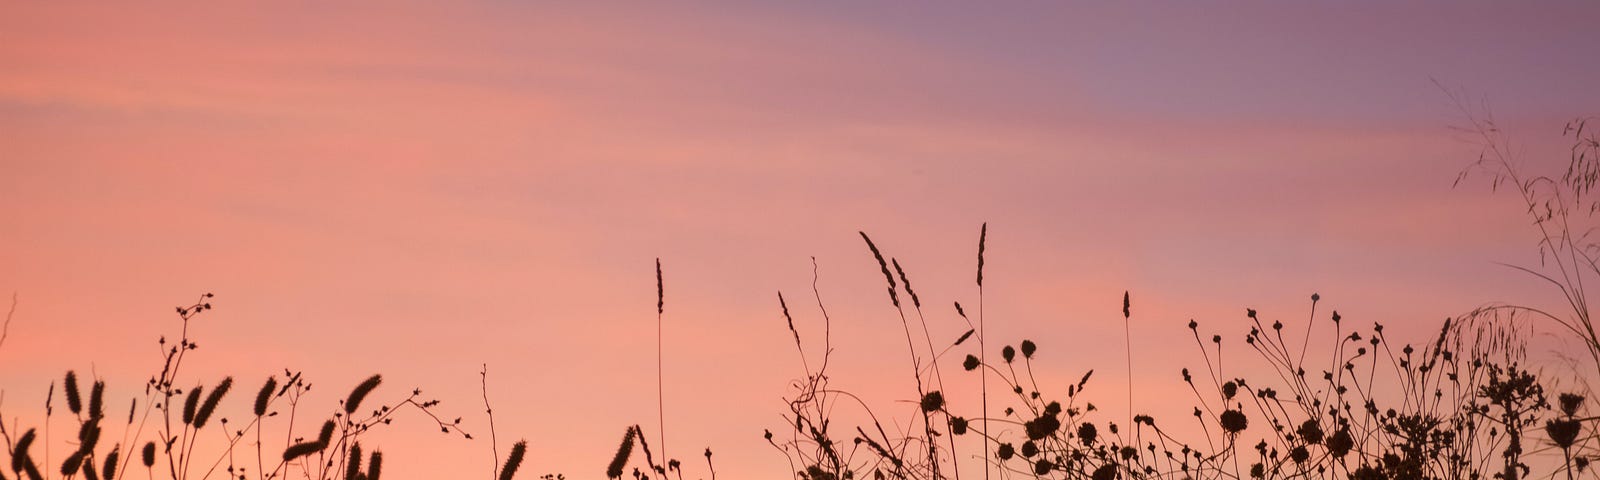 Cattails silhouetted against a purple and rose evening sky.